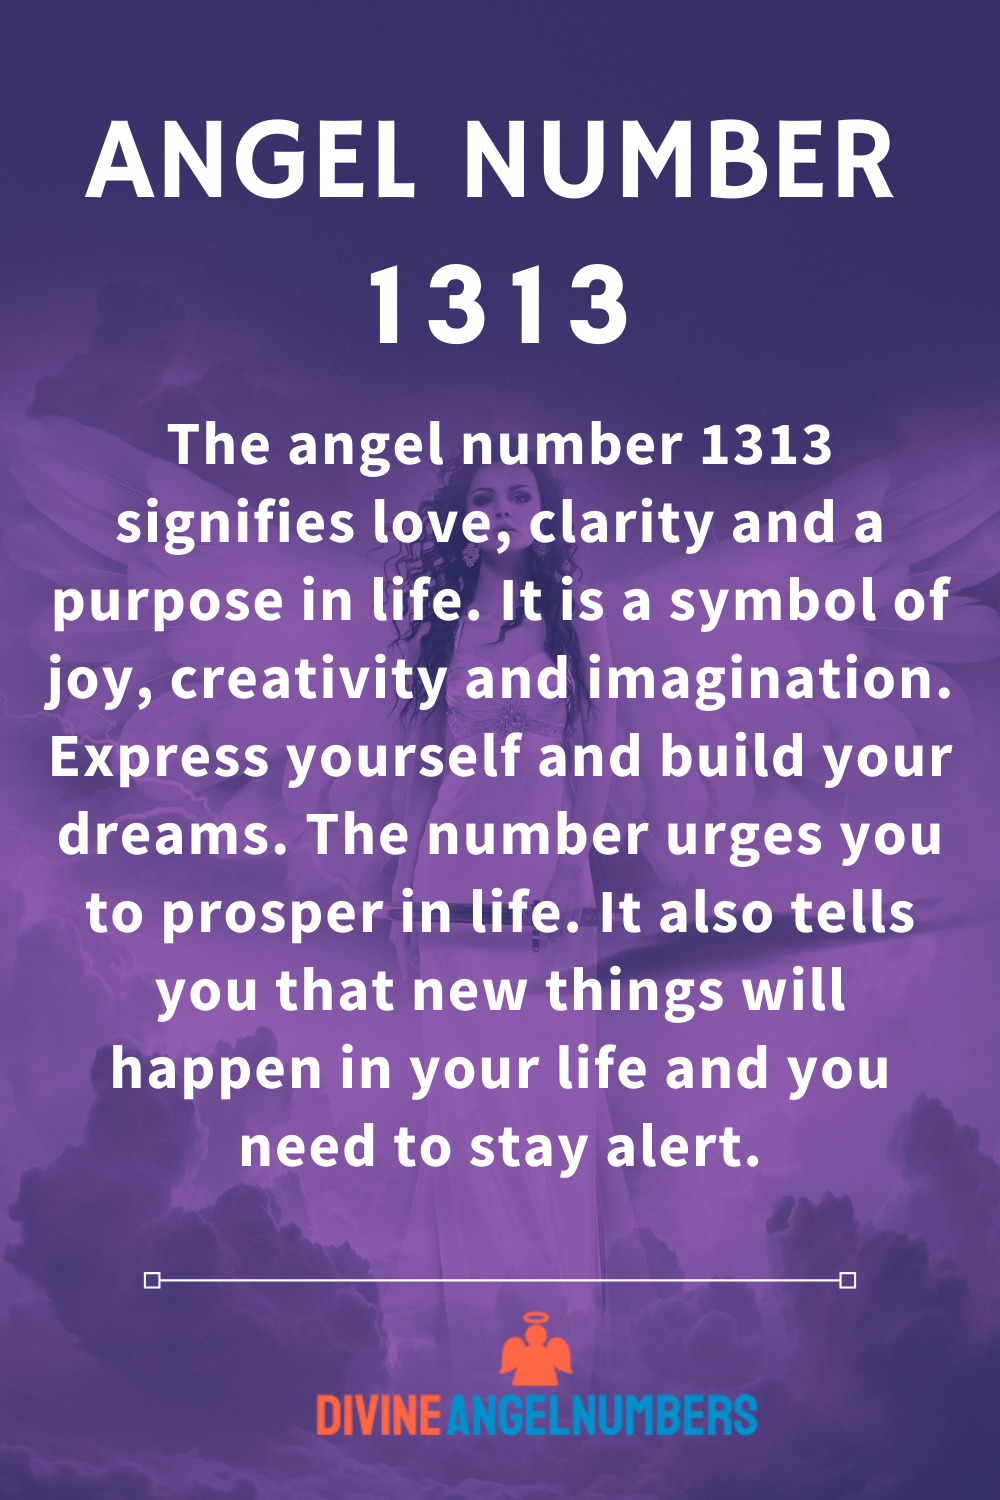 Angel Number 1313 Meanings and Symbolism